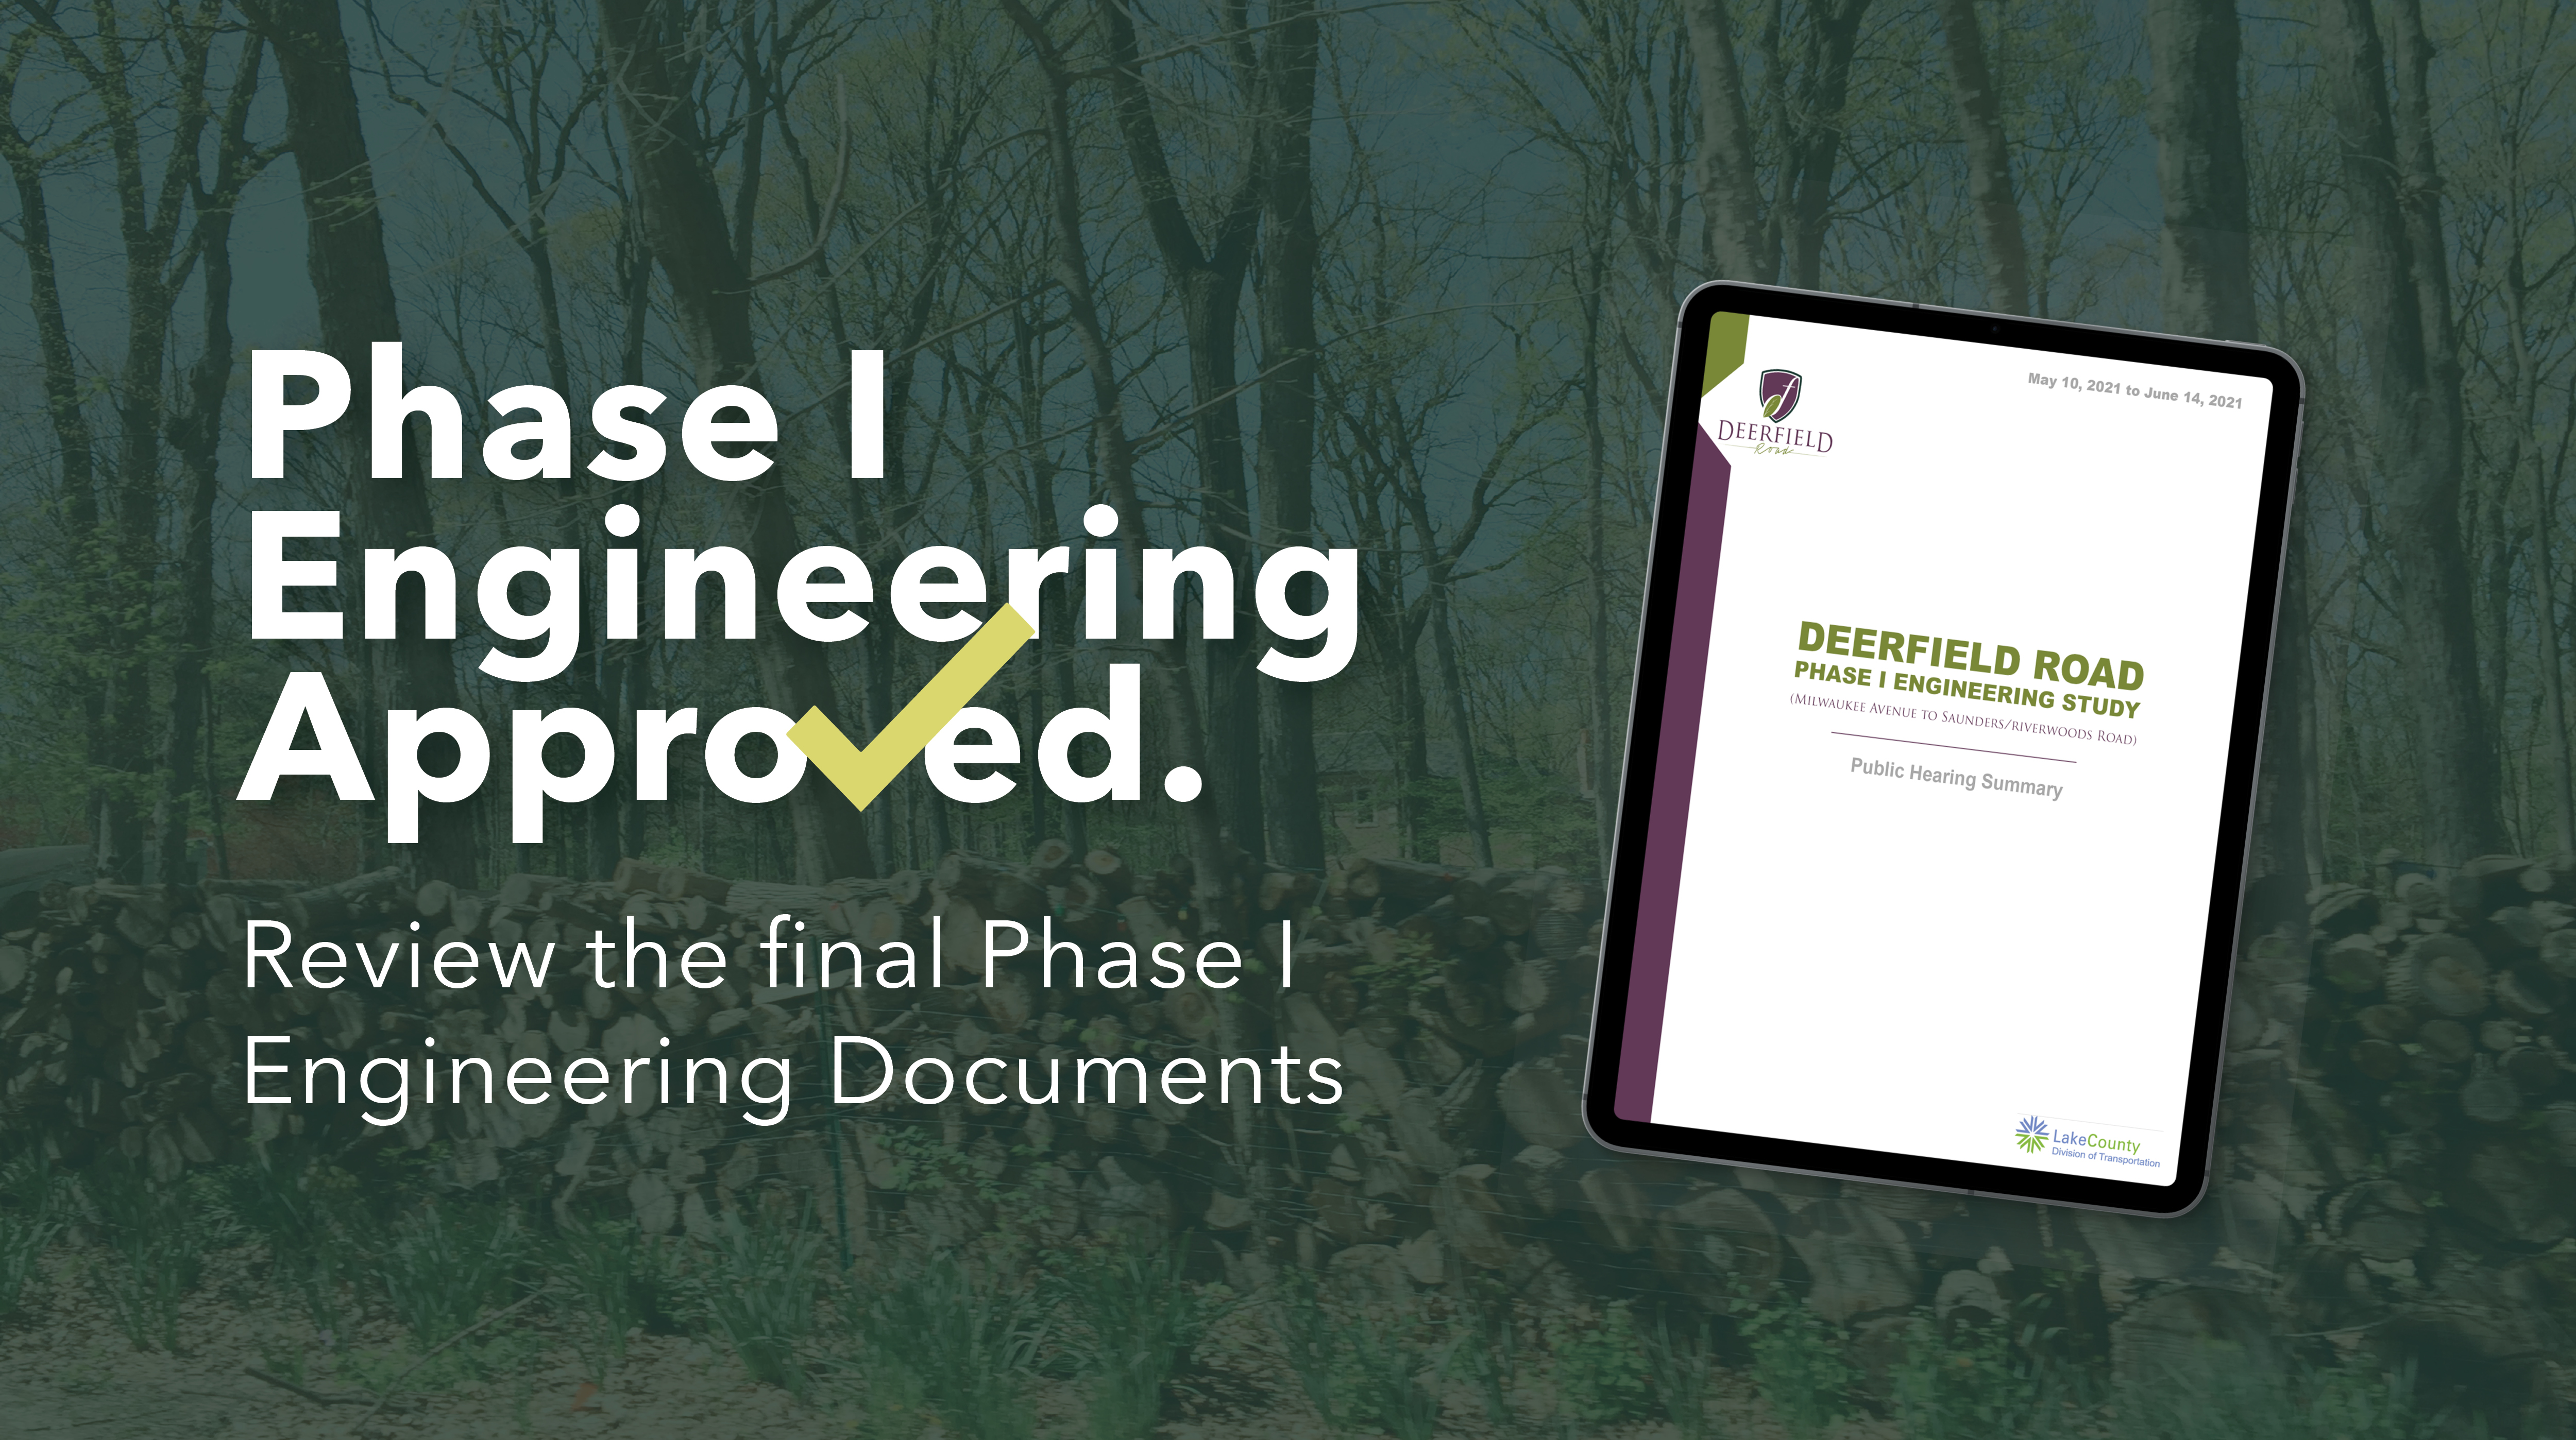 Phase 1 Engineering Approved. Review the final Phase 1 Engineering documents